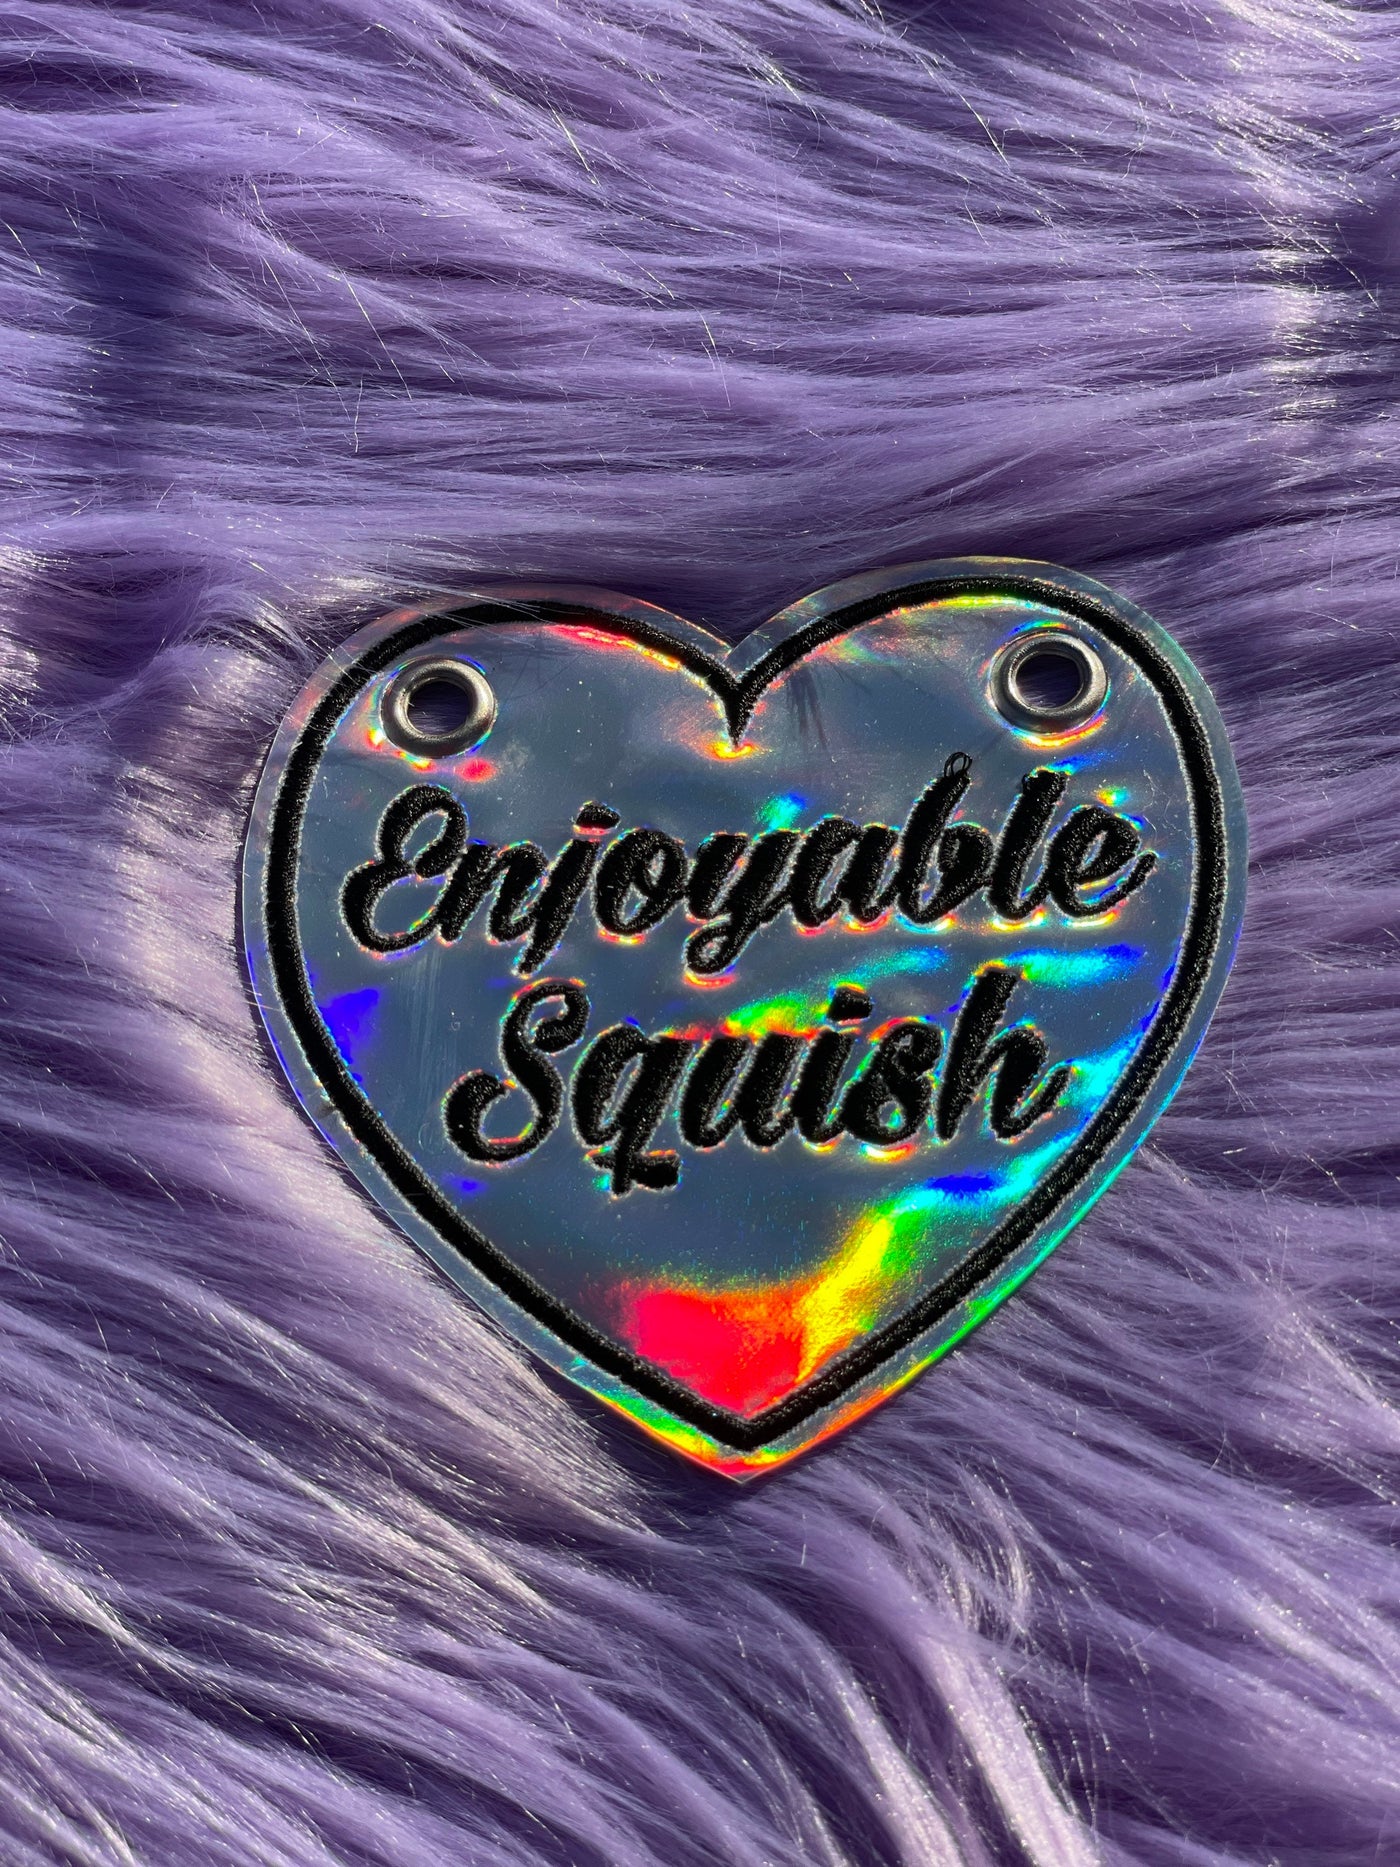 Enjoyable squish roller skate patch with eyelets